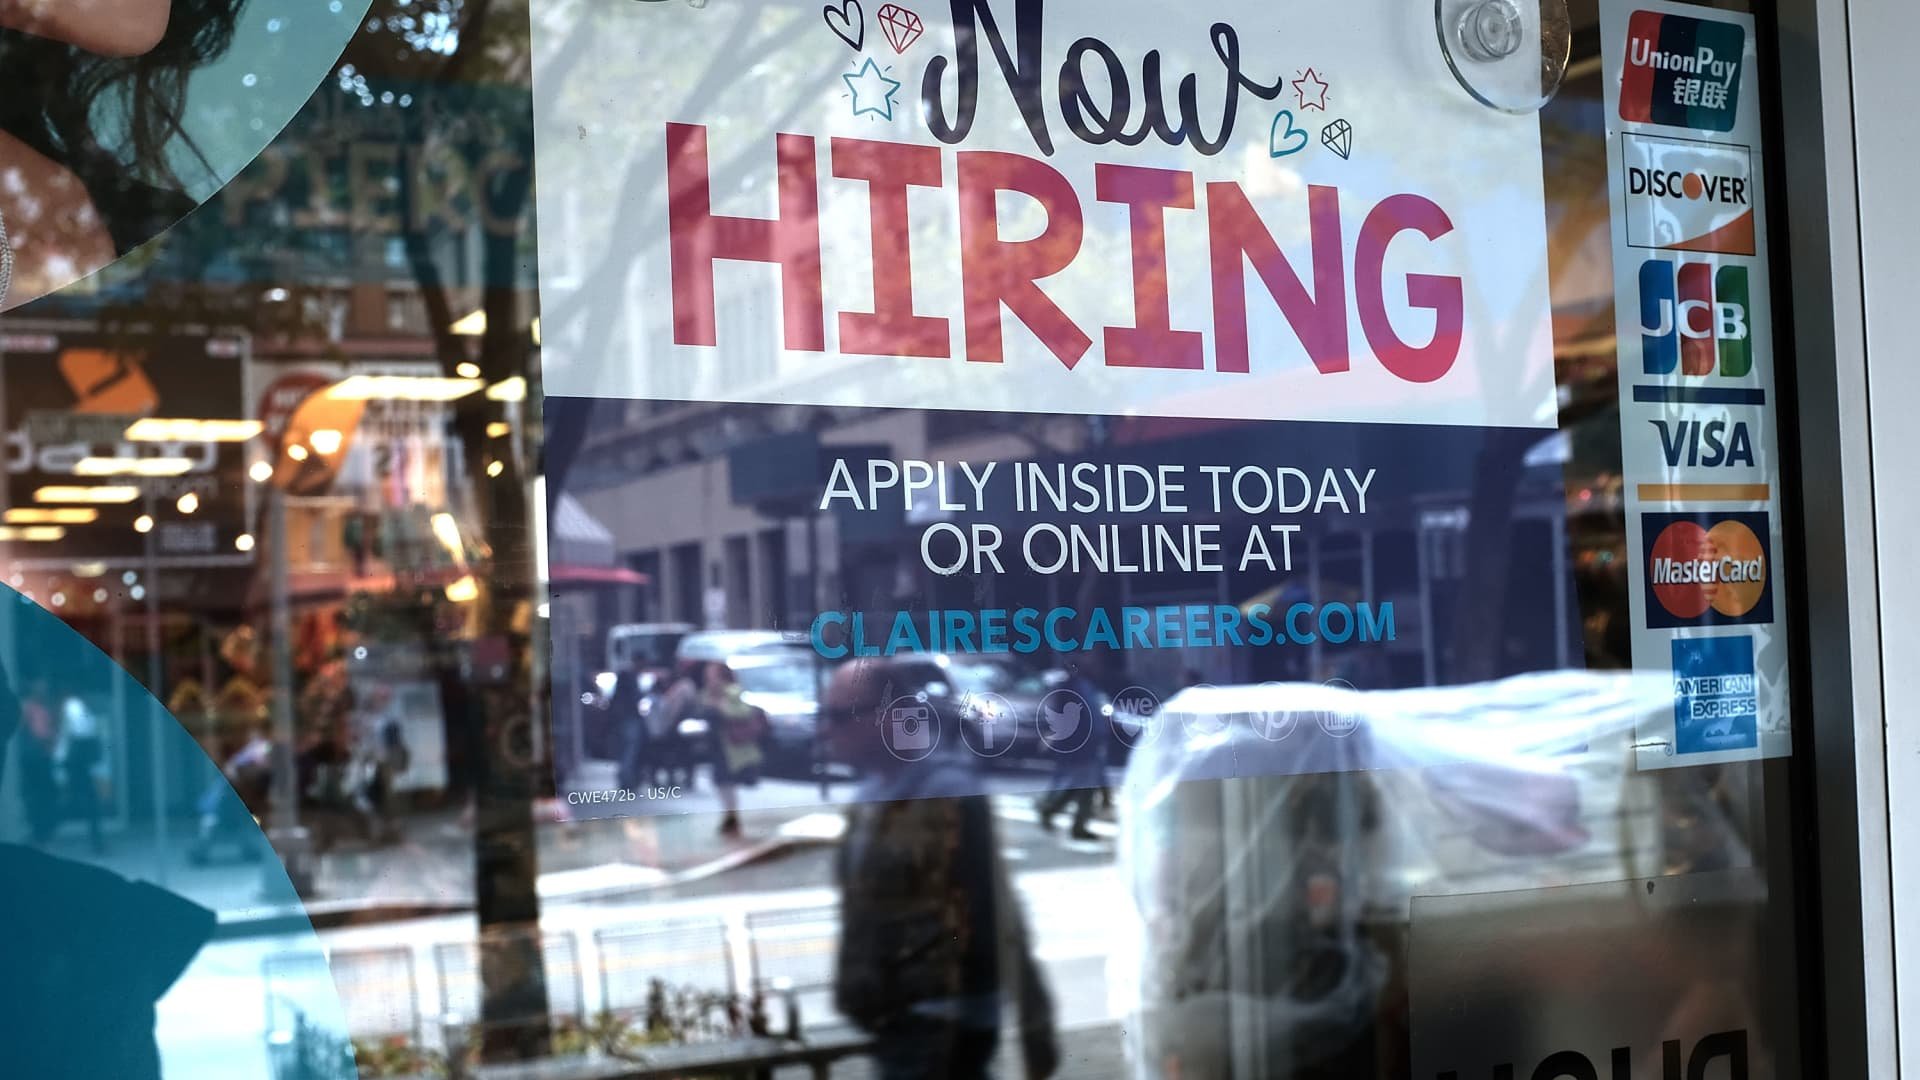 Jobs report shows improvement, but not enough to get Fed talking about tapering